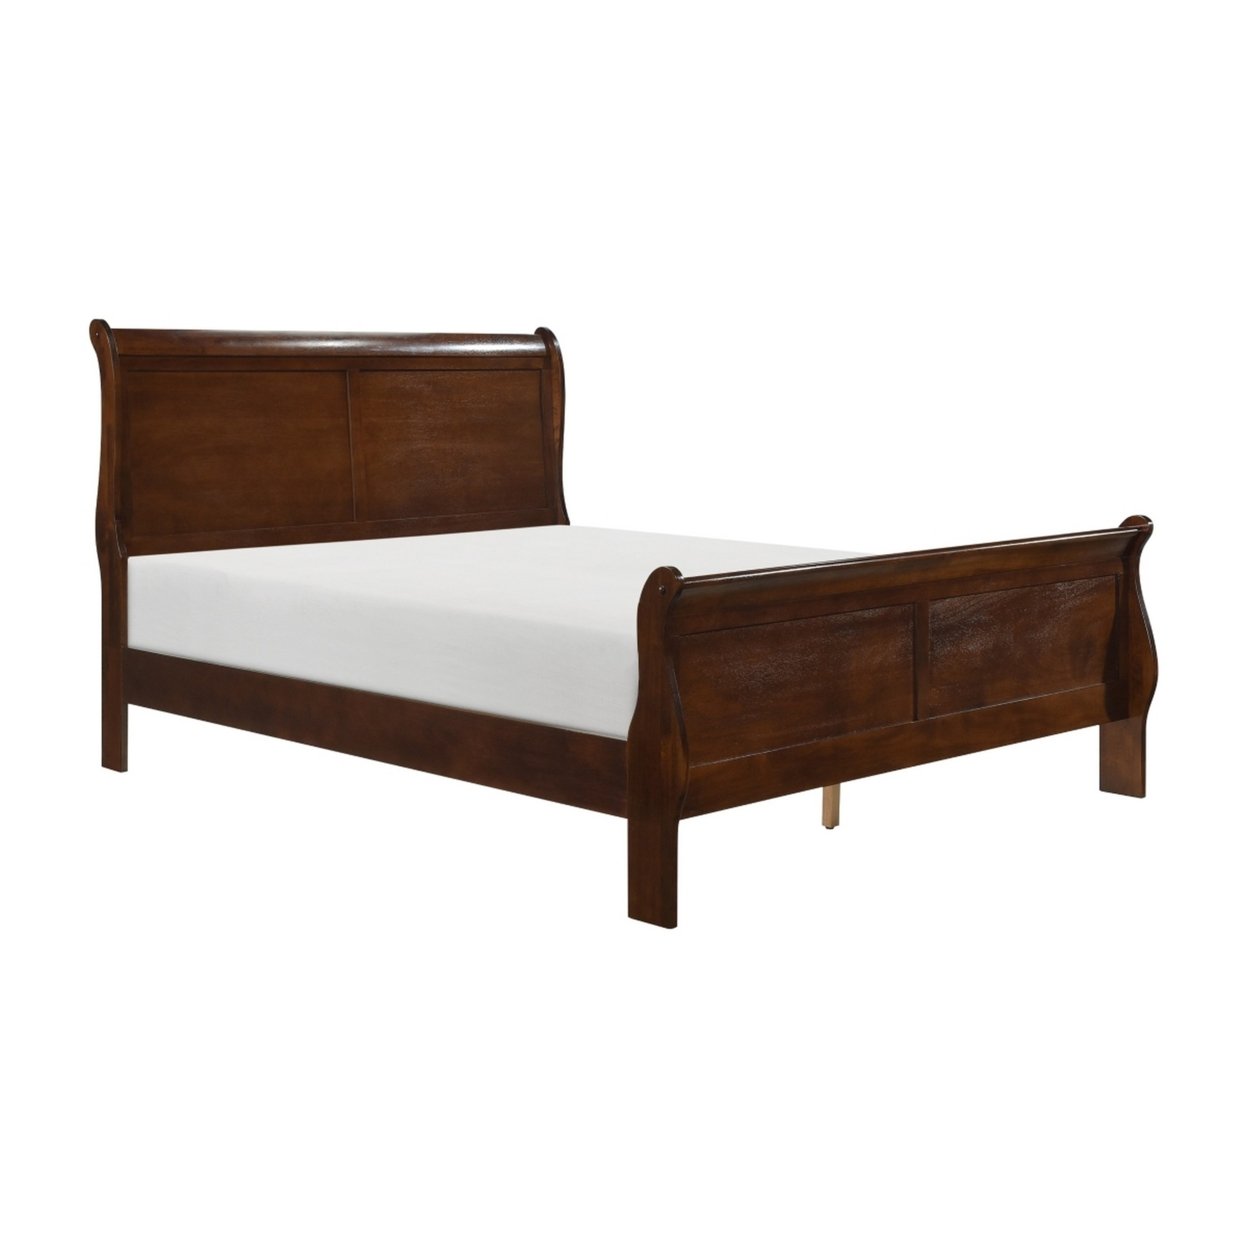 Gage Traditional Queen Sleigh Bed, Wood Frame, Rich Brown Cherry Finish- Saltoro Sherpi